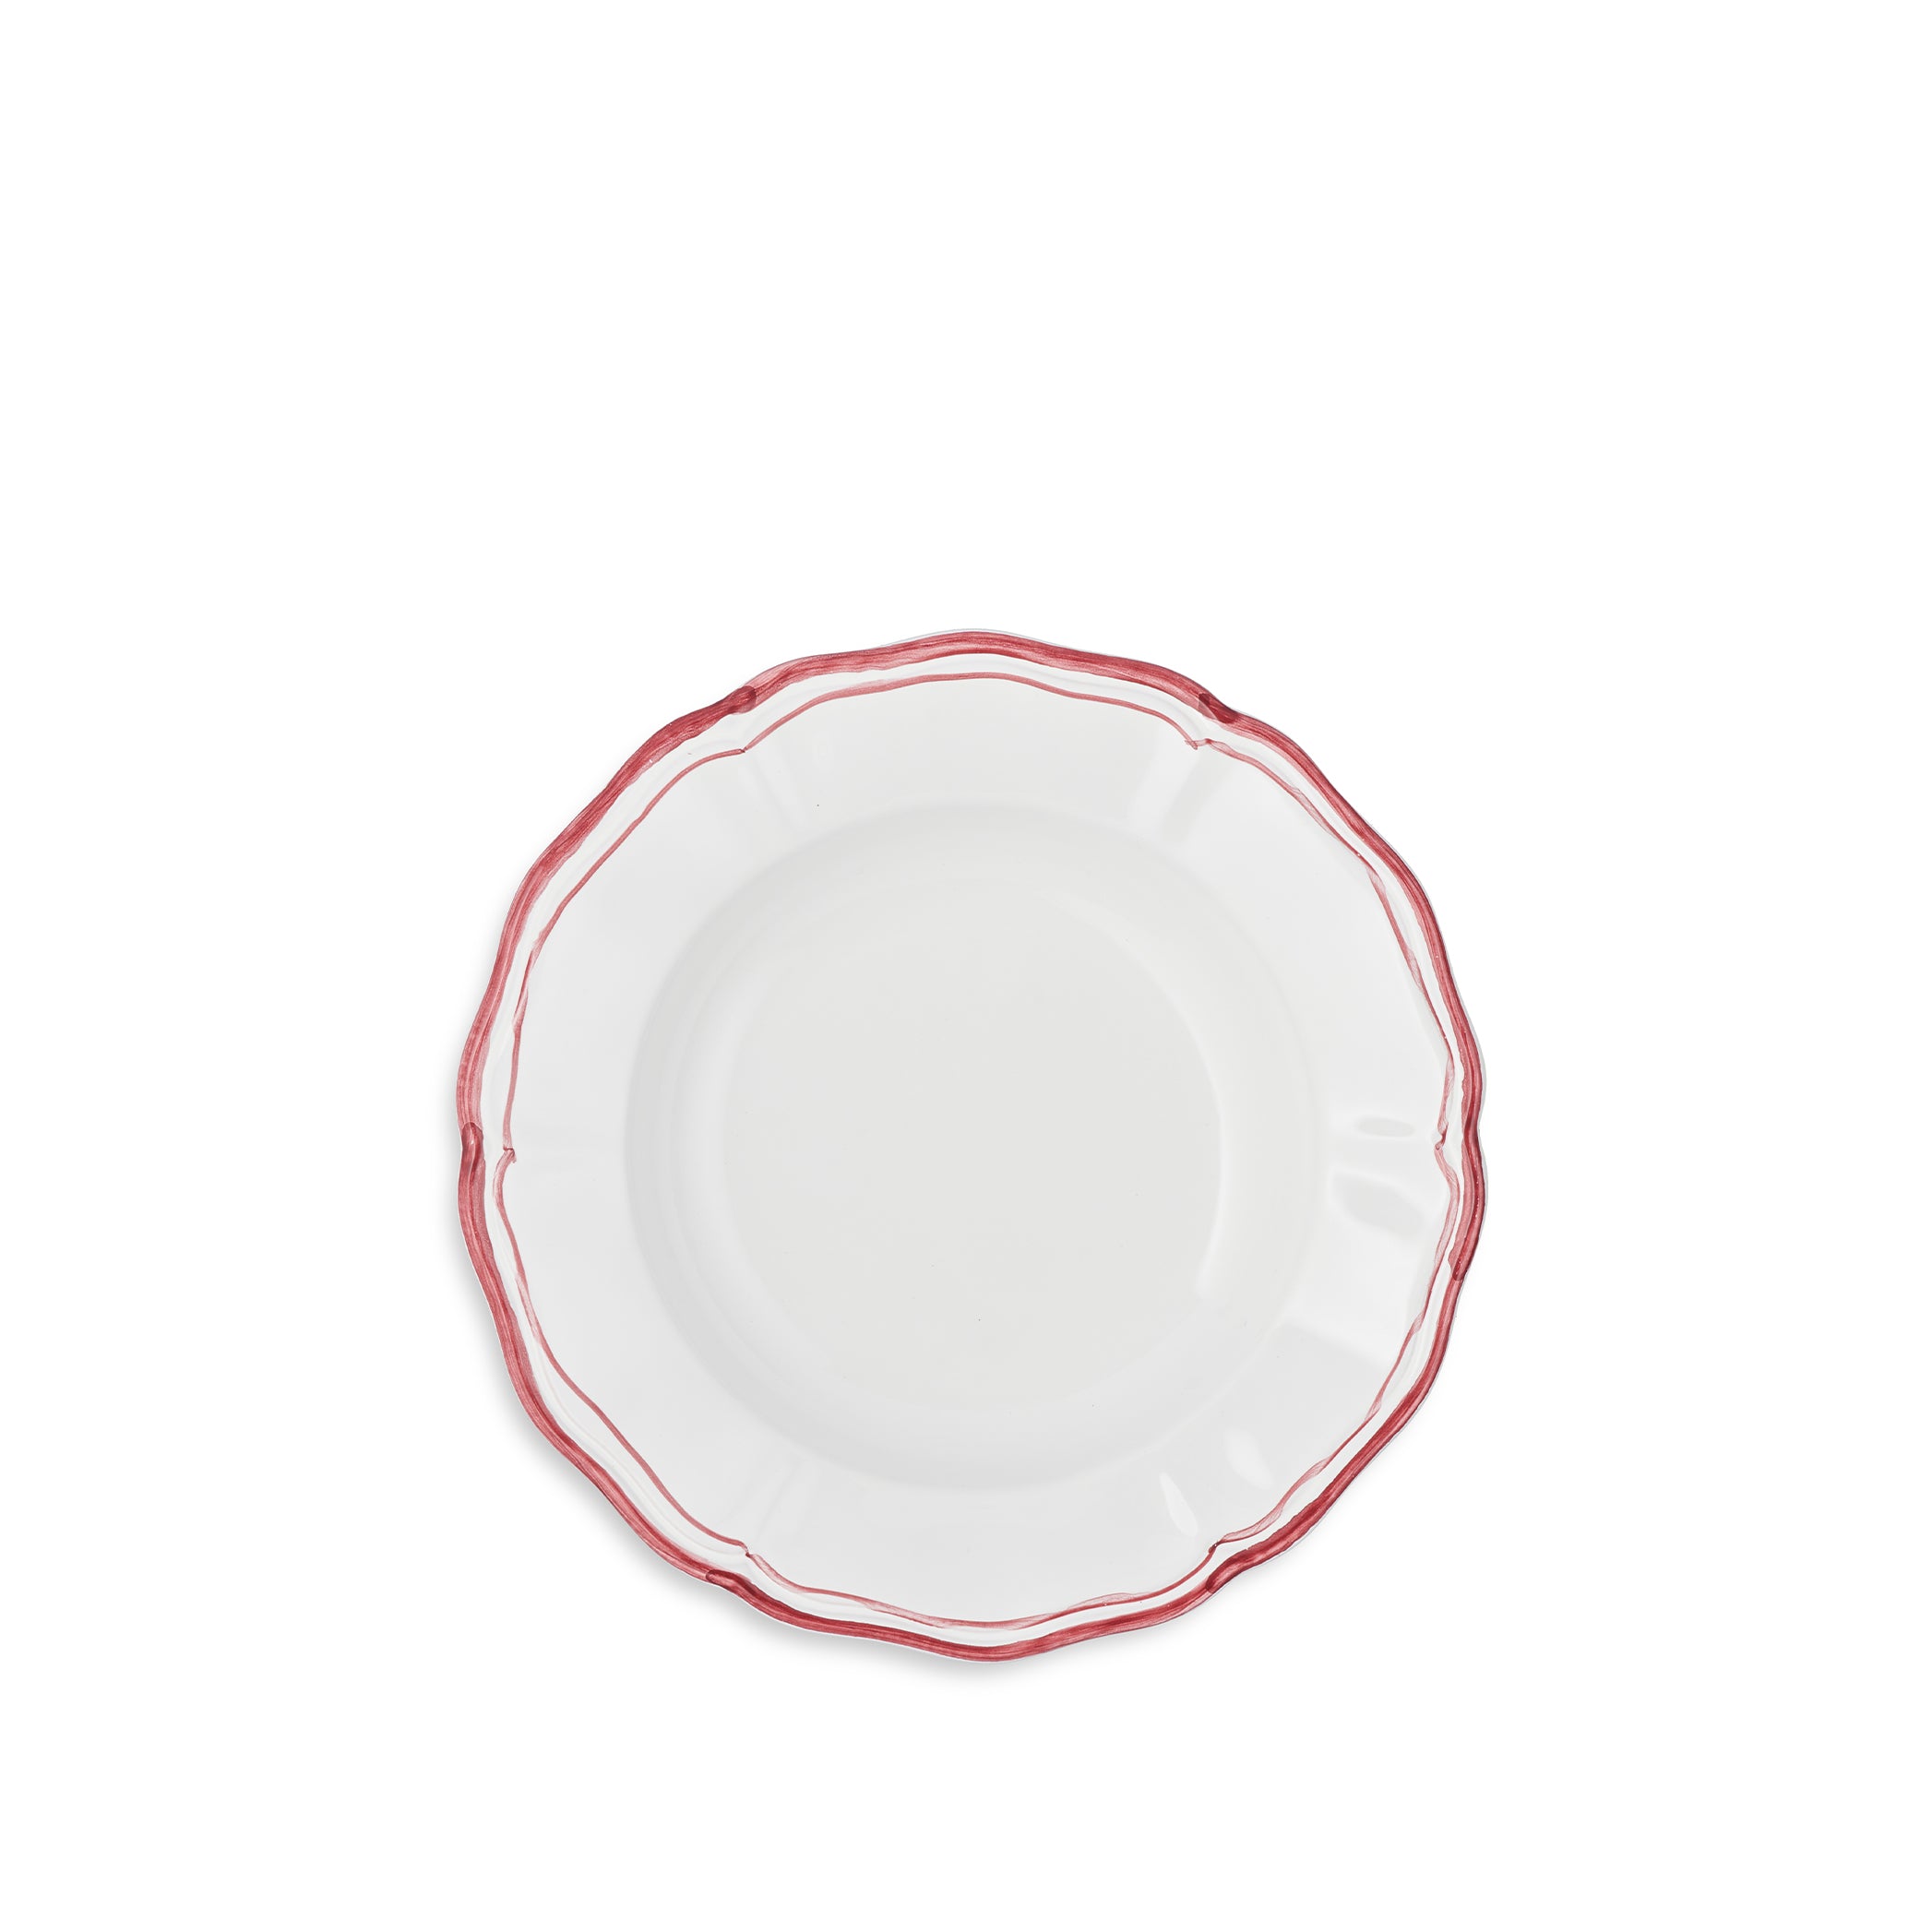 Scalloped Soup Plate With Red Double Rim, 25cm